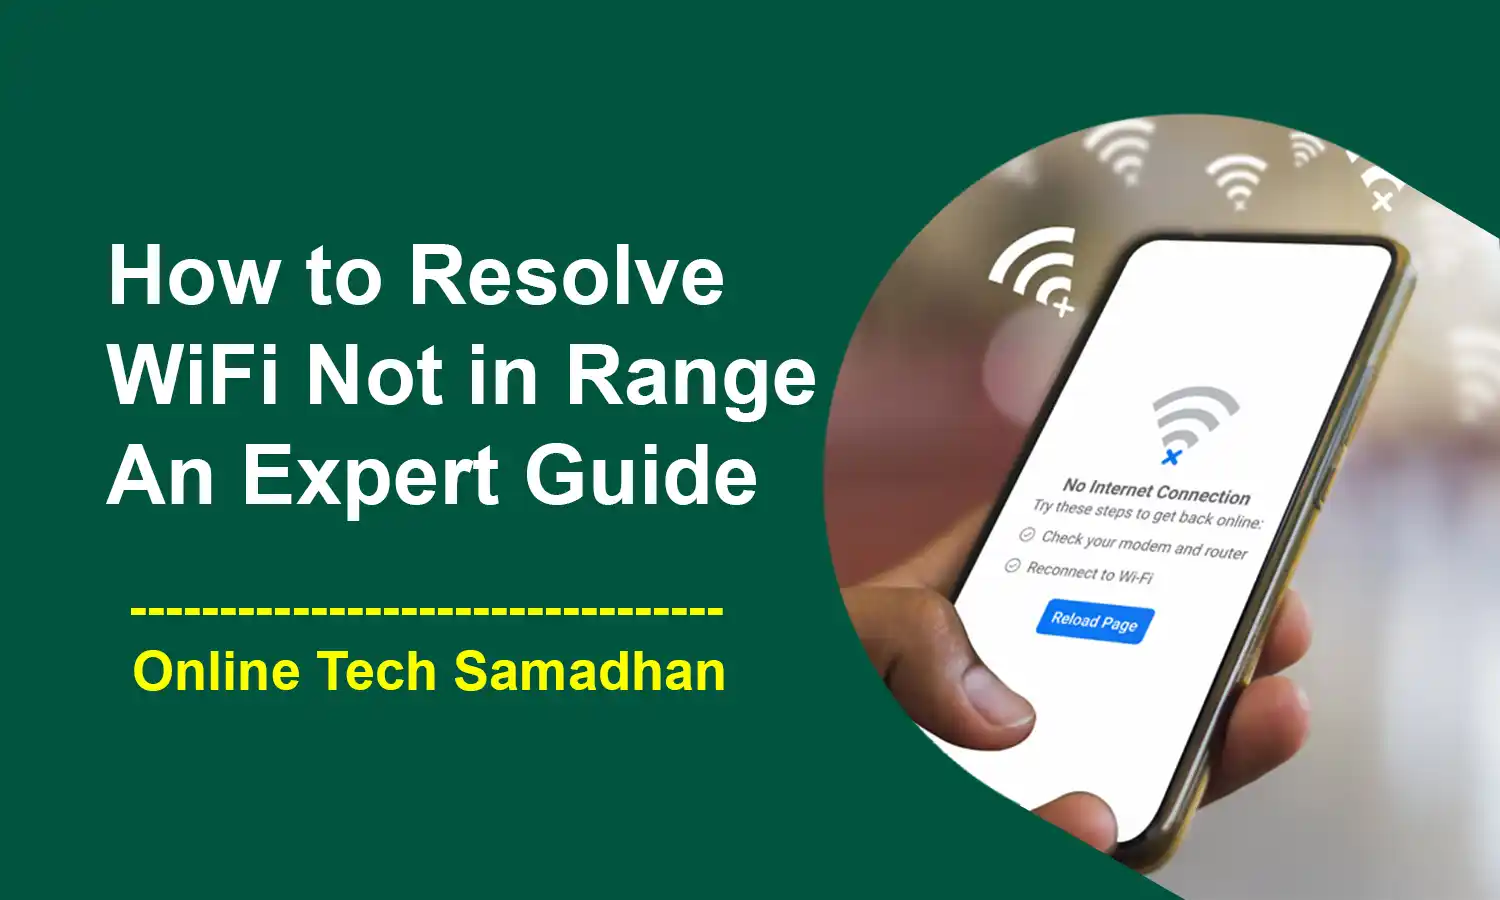 How to Resolve WiFi Not in Range Issues